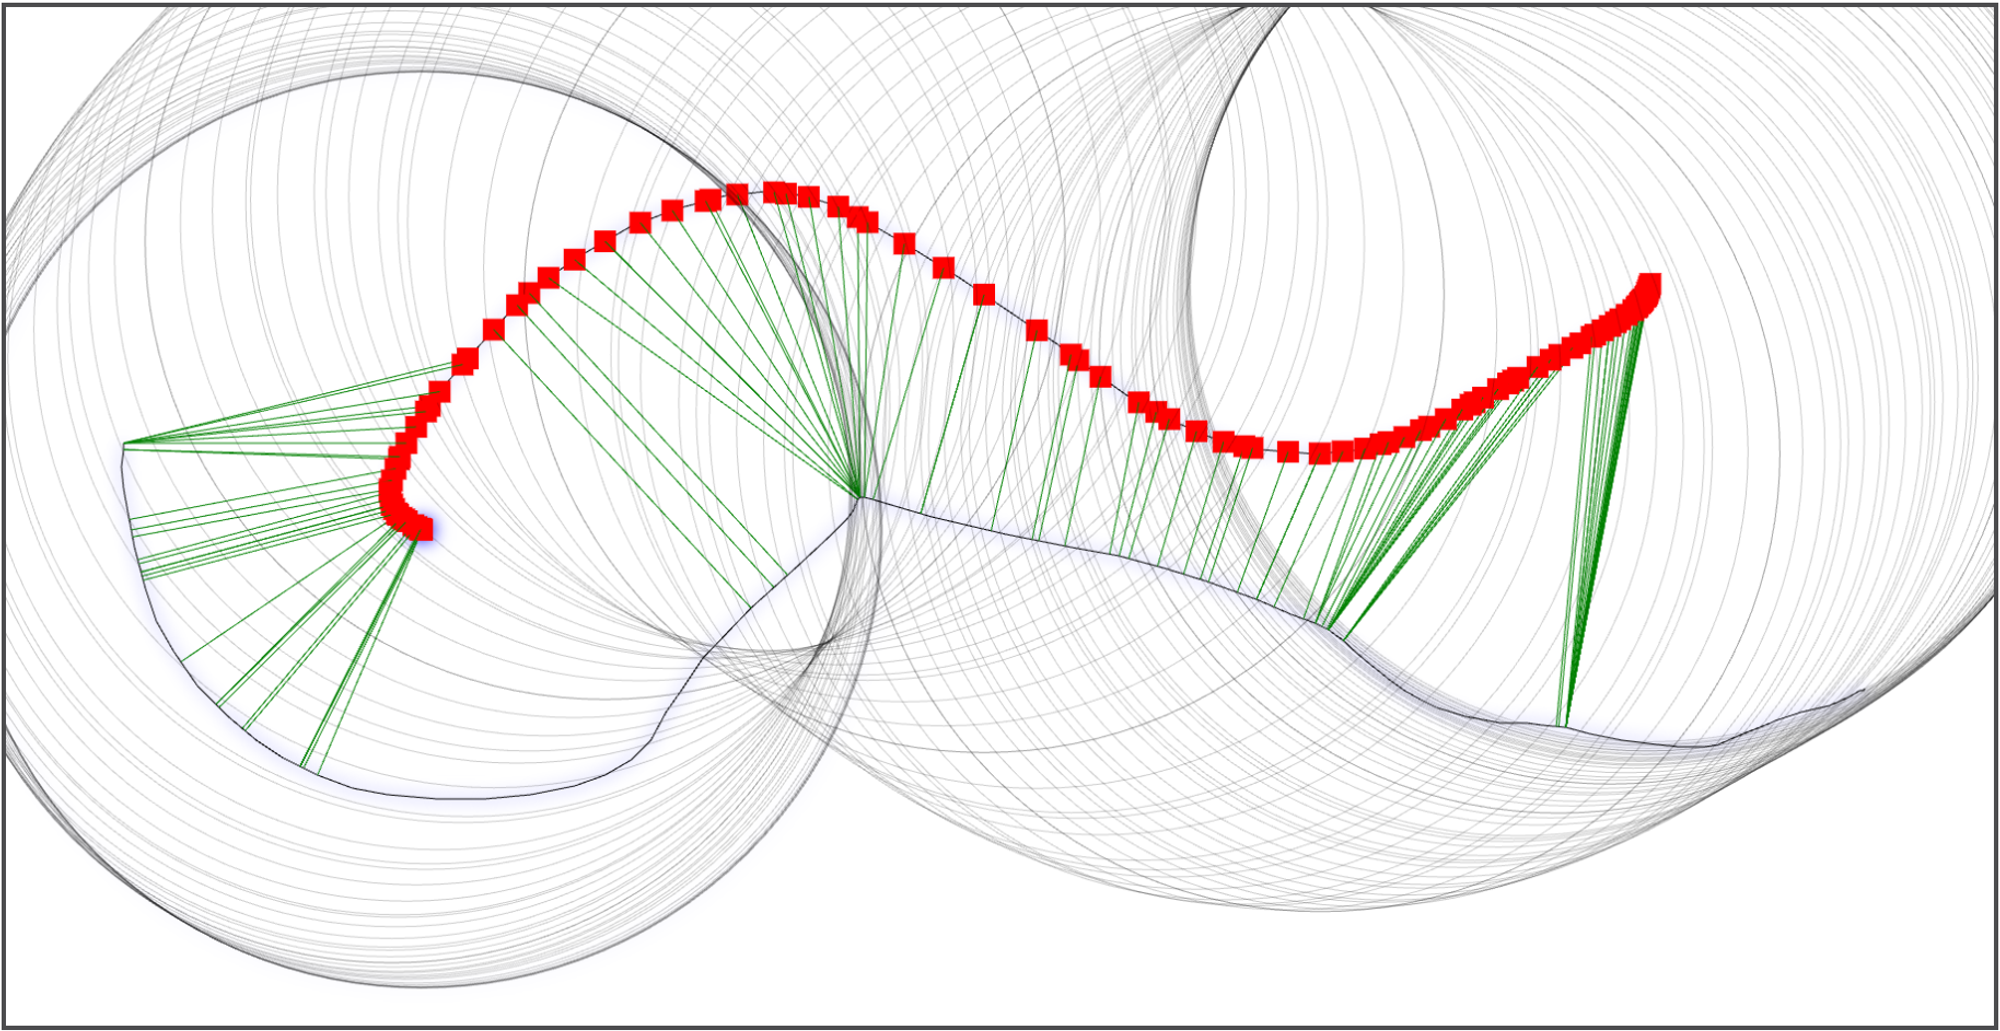 Fréchet Distance demo: the distance is indicated by the radius of the circles (all of the same radius); The green lines are the shortest distance from each red points from curve 1 to curve 2, all of the green lines should be shorter than Fréchet distance. 